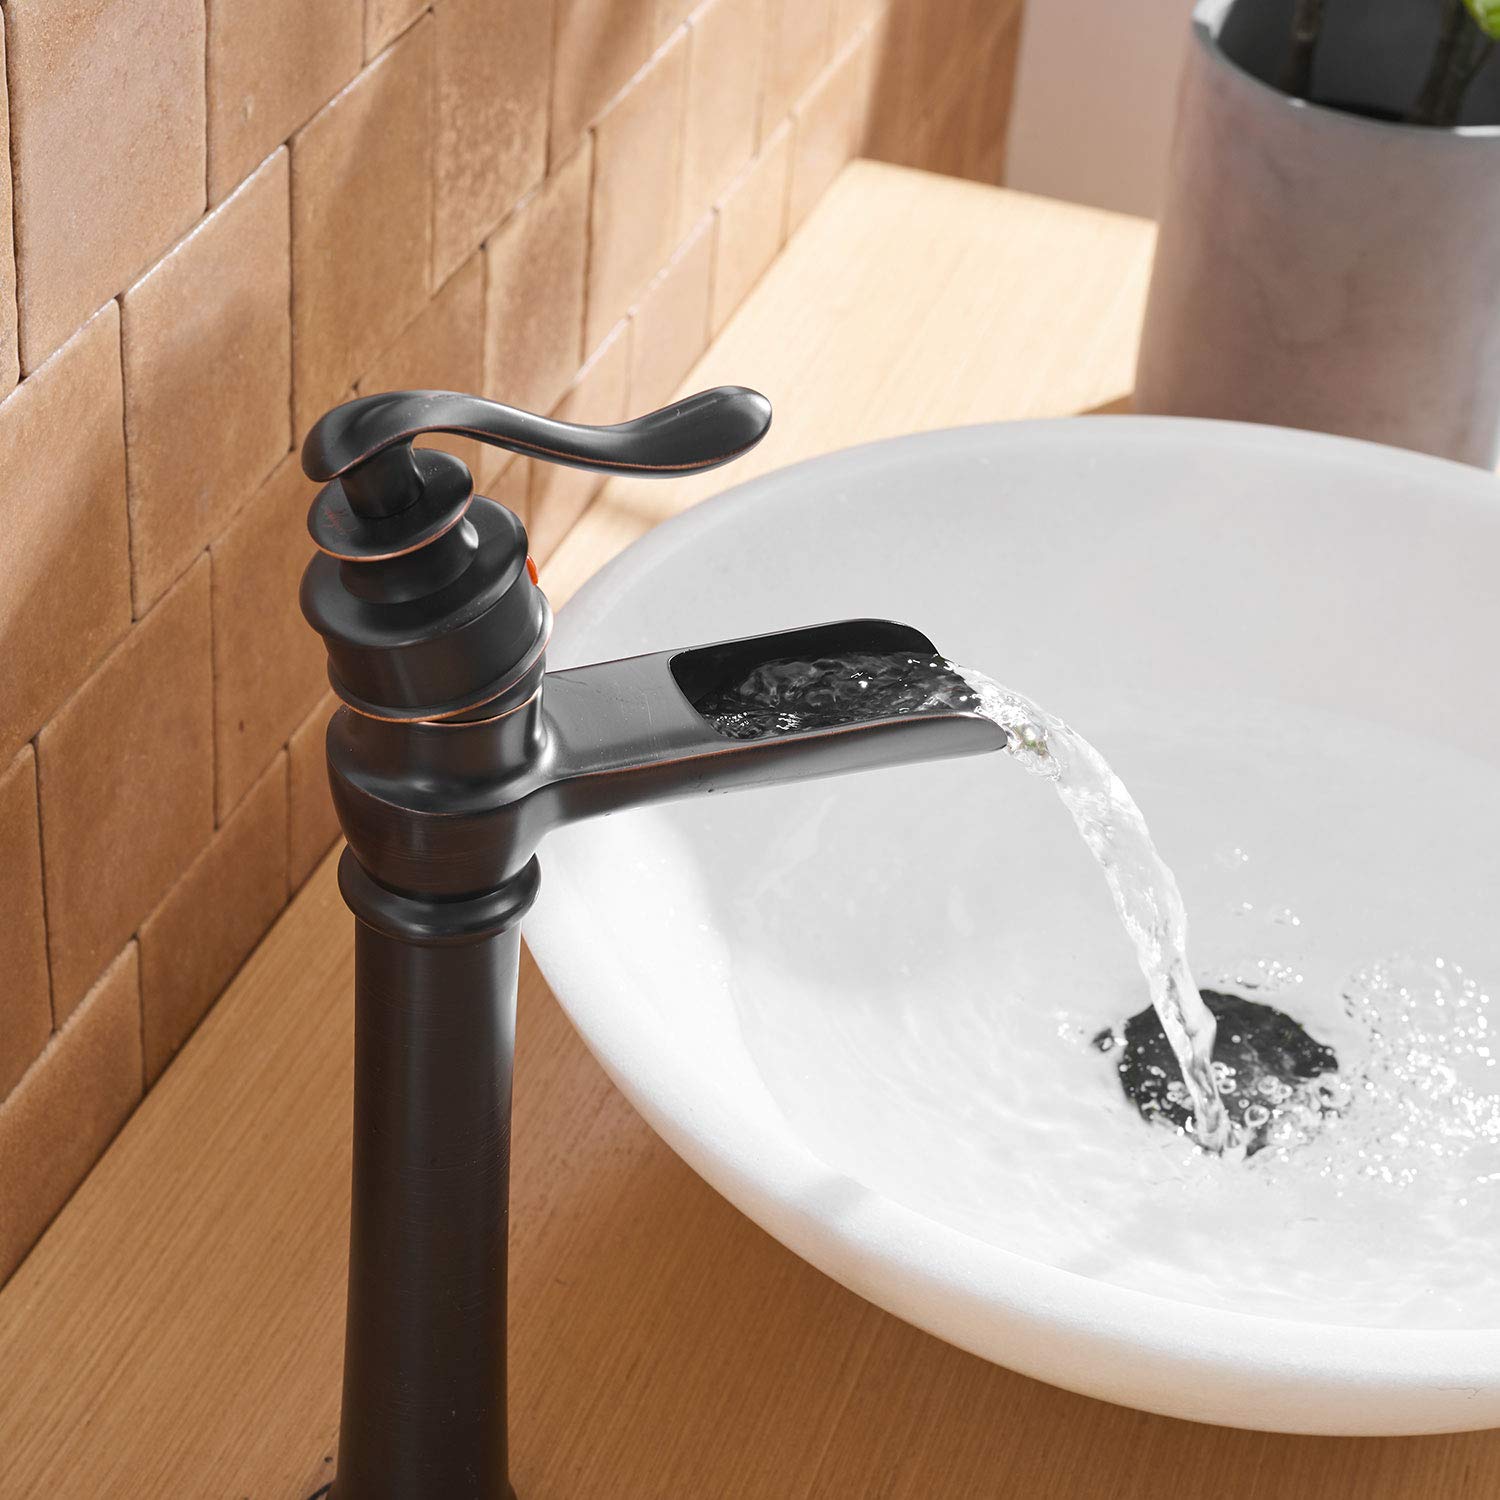 Waterfall Spout Oil Rubbed Bronze Bathroom Faucet Deck Mounted Vessel Sink Single Lever Handle Commercial Basin Mixer Tap Faucet One Hole